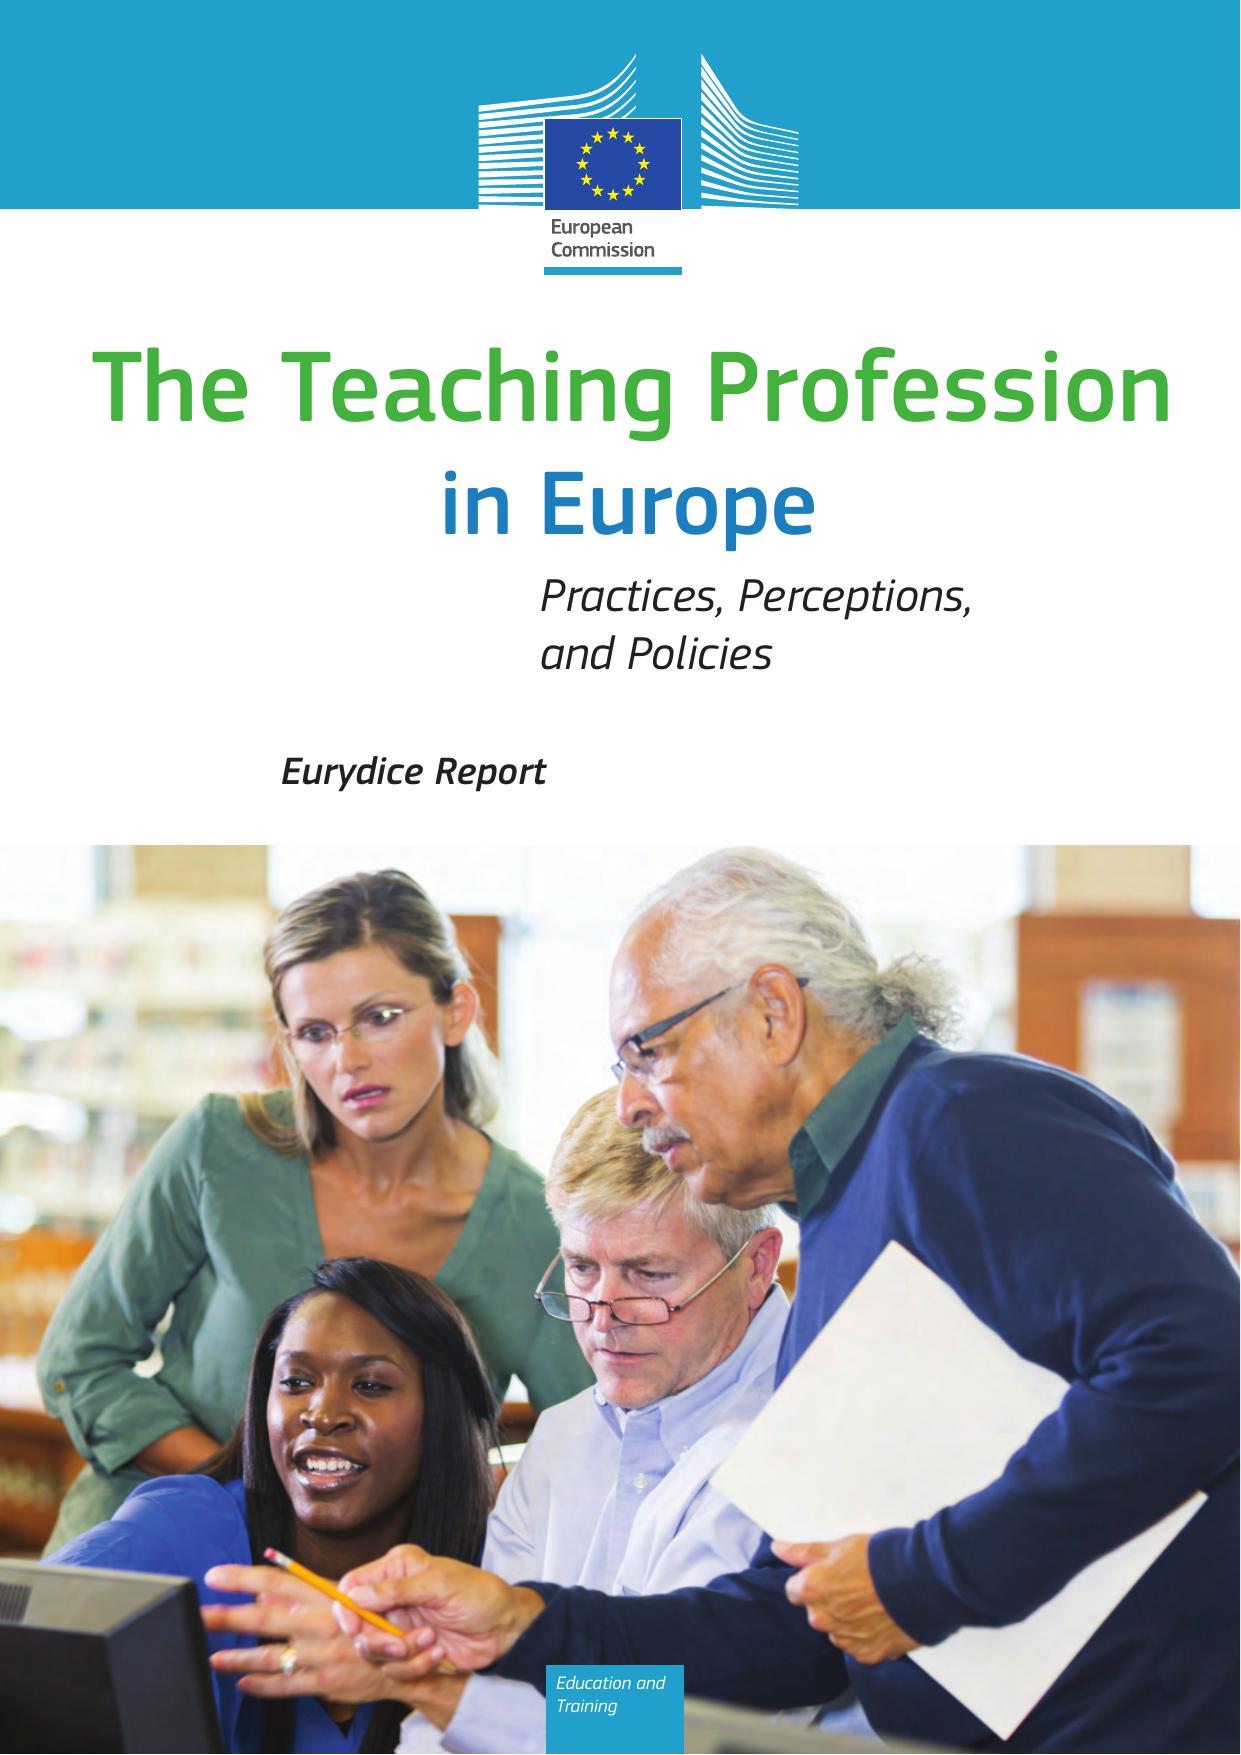 The Teaching Profession in Europe: Practices, Perceptions, and Policies